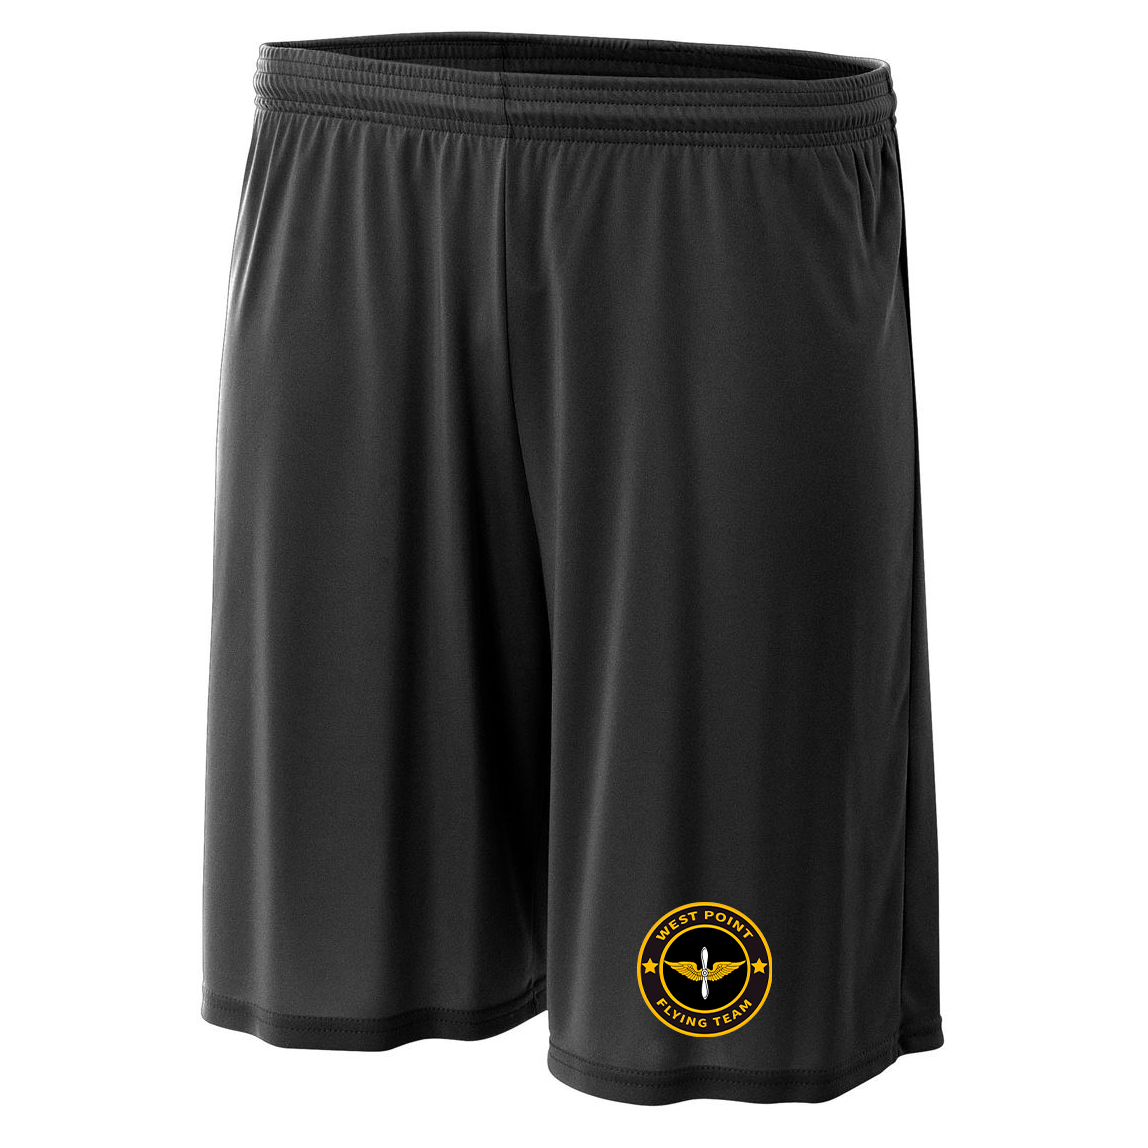 West Point Flight Team A4 Cooling 7" Performance Shorts